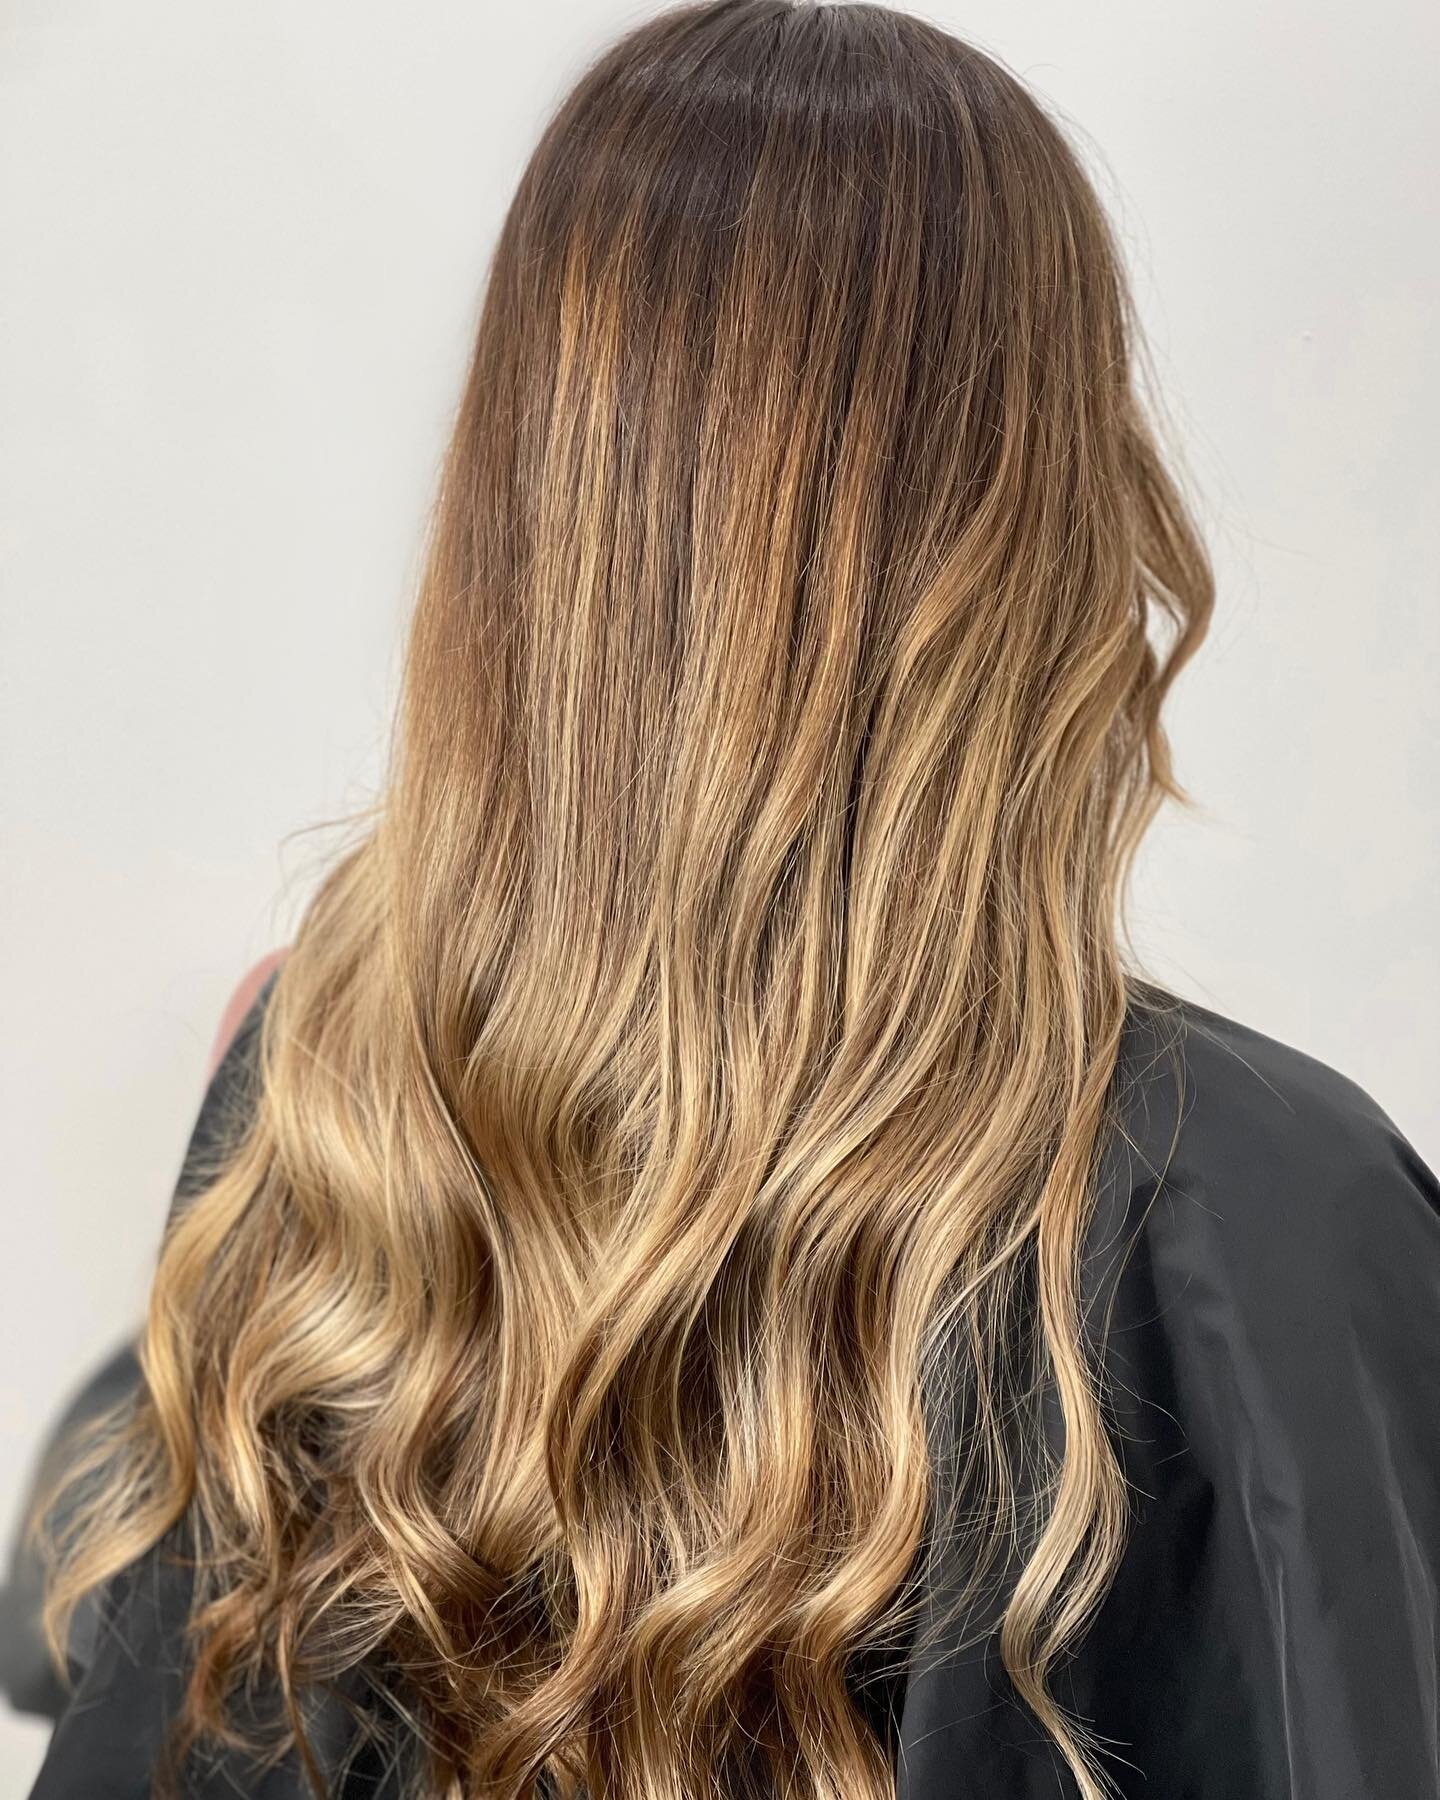 Bronde goddess 👑

What actually is the color bronde? The perfect blend of blonde and brunette 💁&zwj;♀️
I feel like it&rsquo;s a great transition color especially for spring and fall.

What do you think? Could this be your next color?